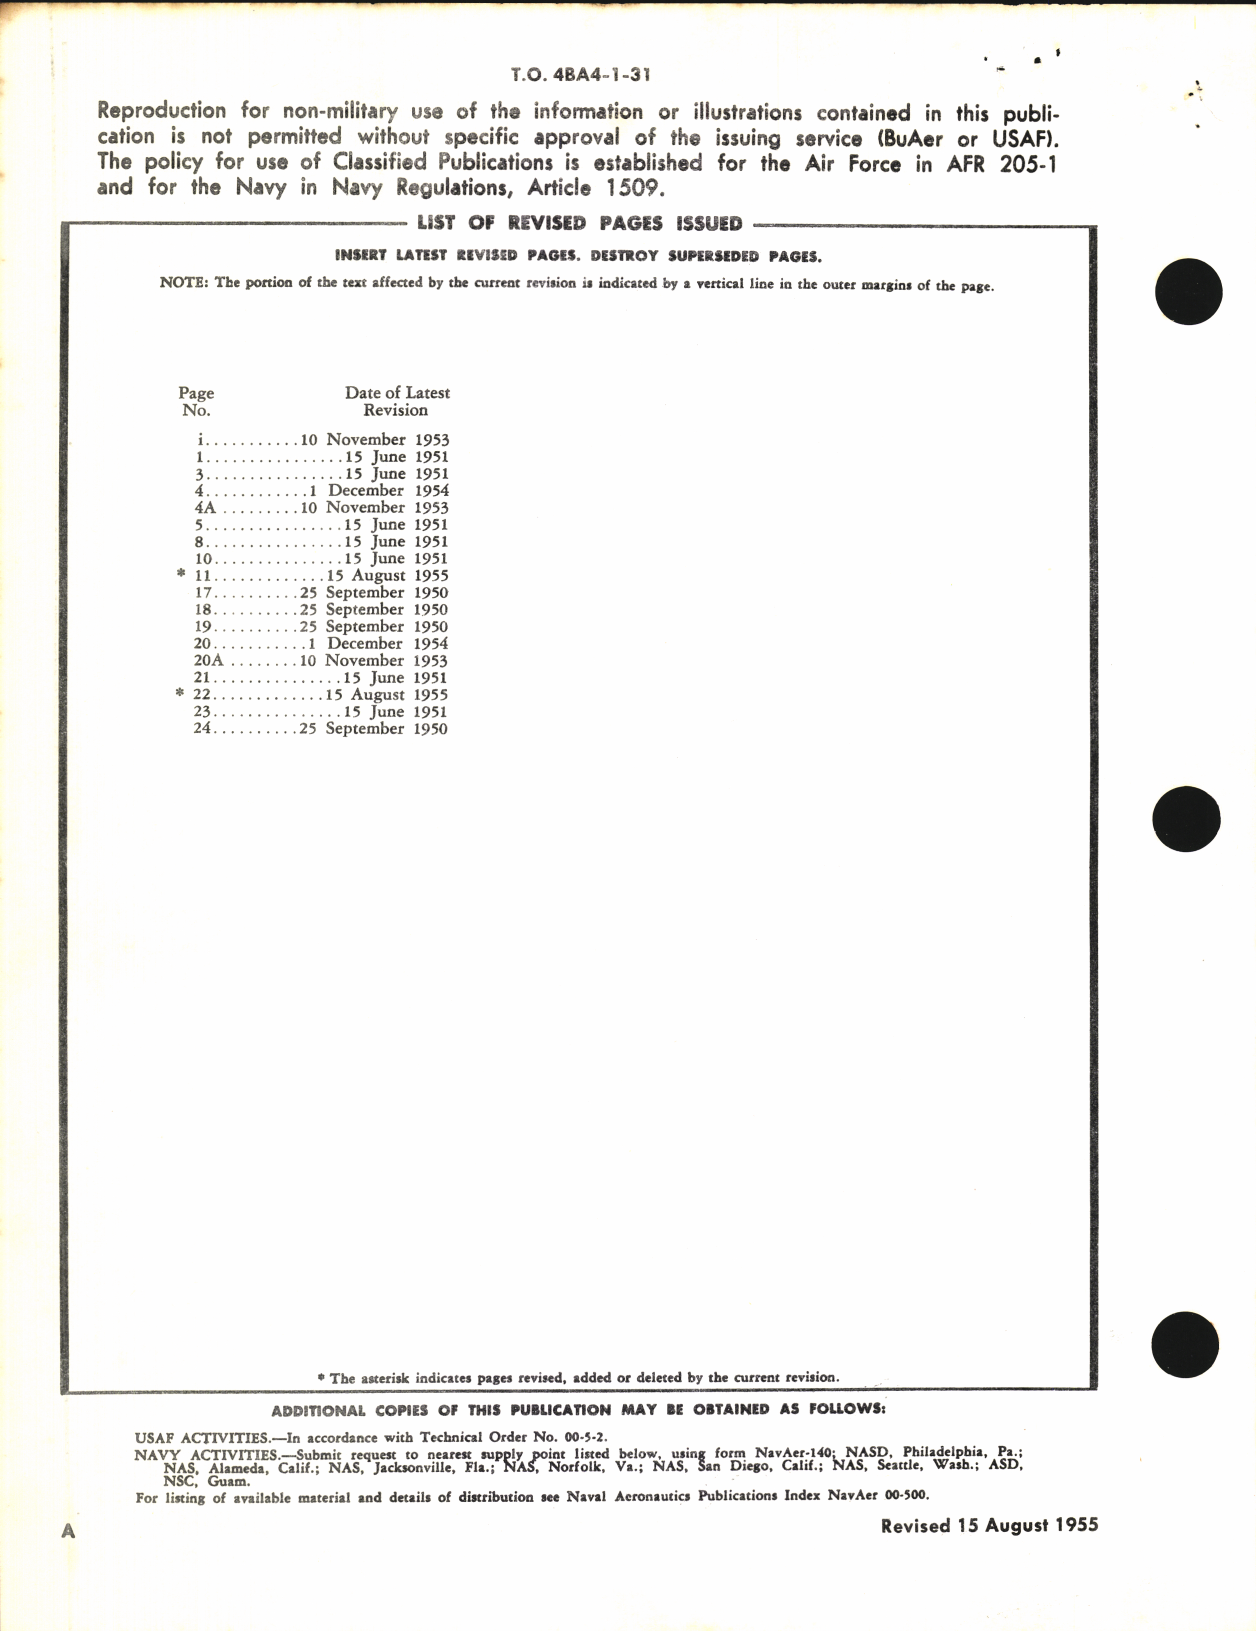 Sample page 2 from AirCorps Library document: Operation, Service, & Overhaul Instructions with Parts Catalog for Power Brake Valves